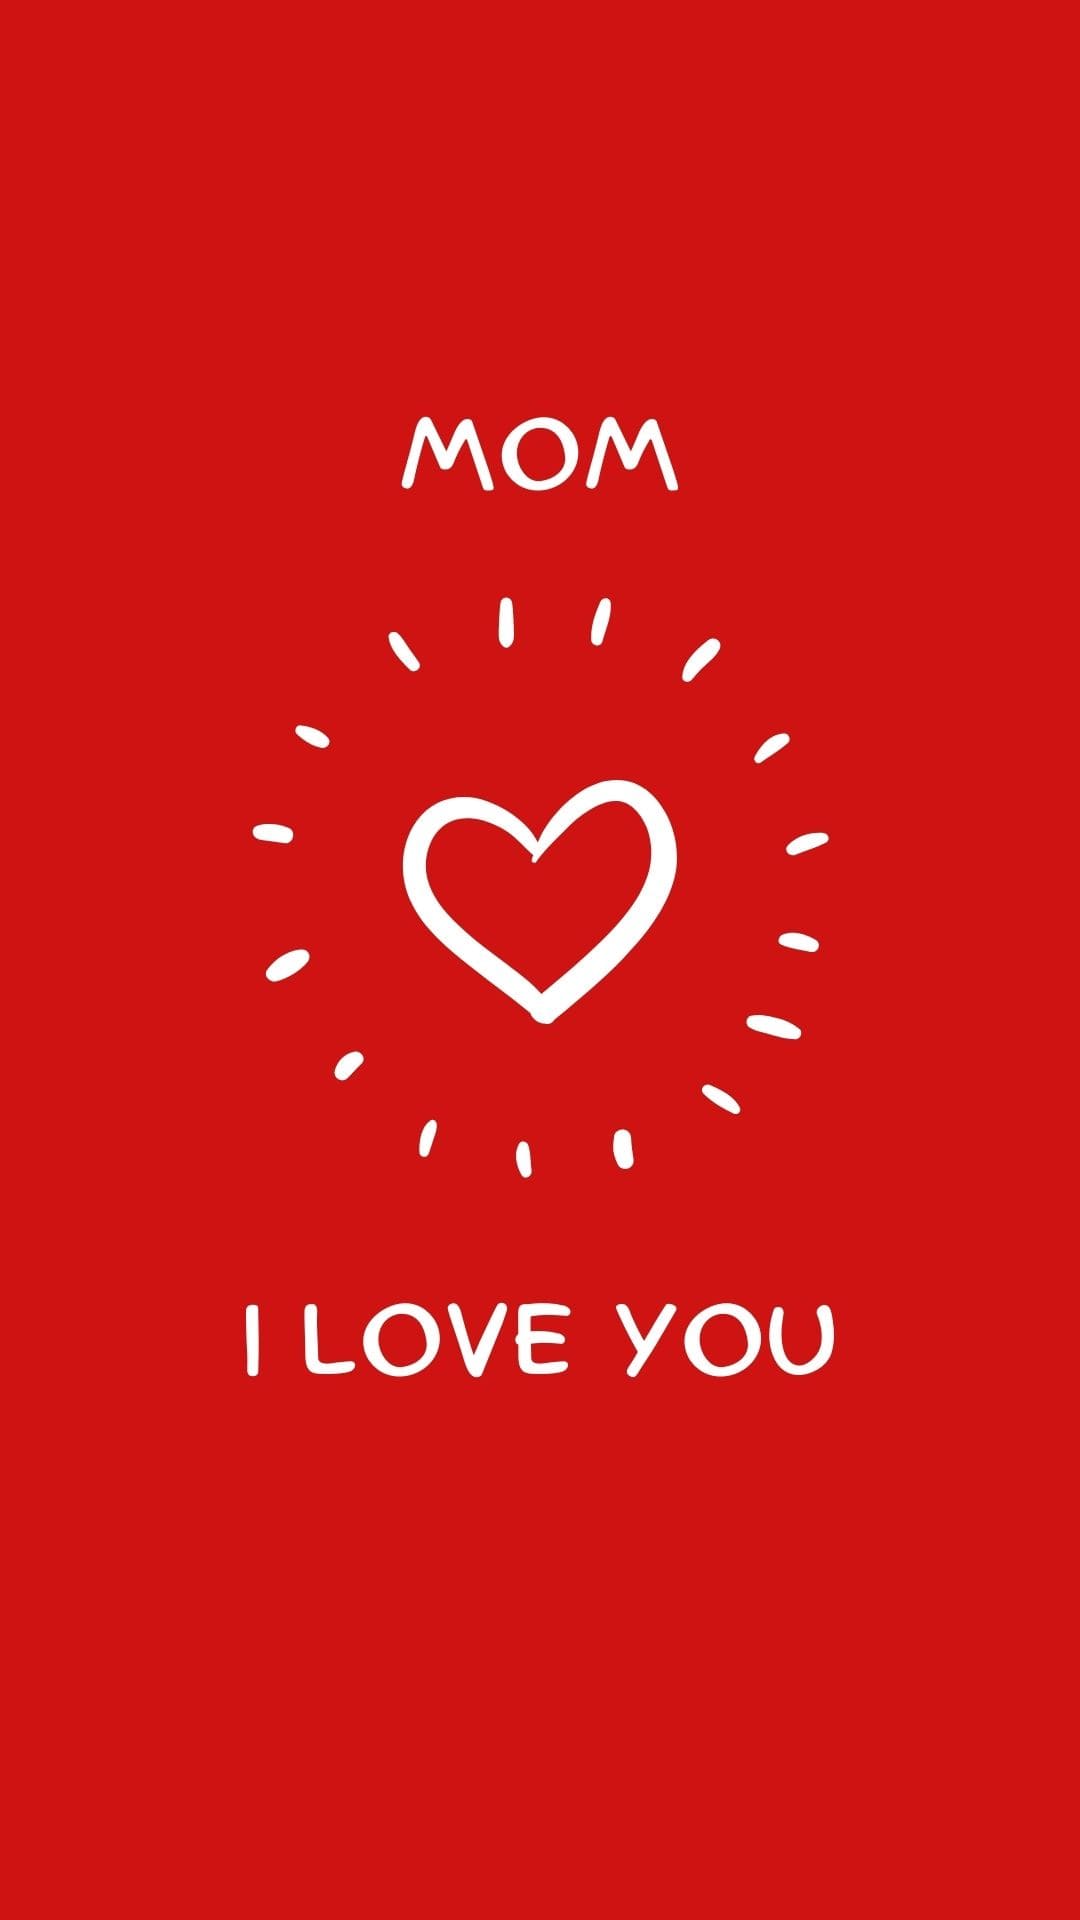 happy mothers day image best mom ever pink heart 2022 iphone 13 pro max wallpaper (11)